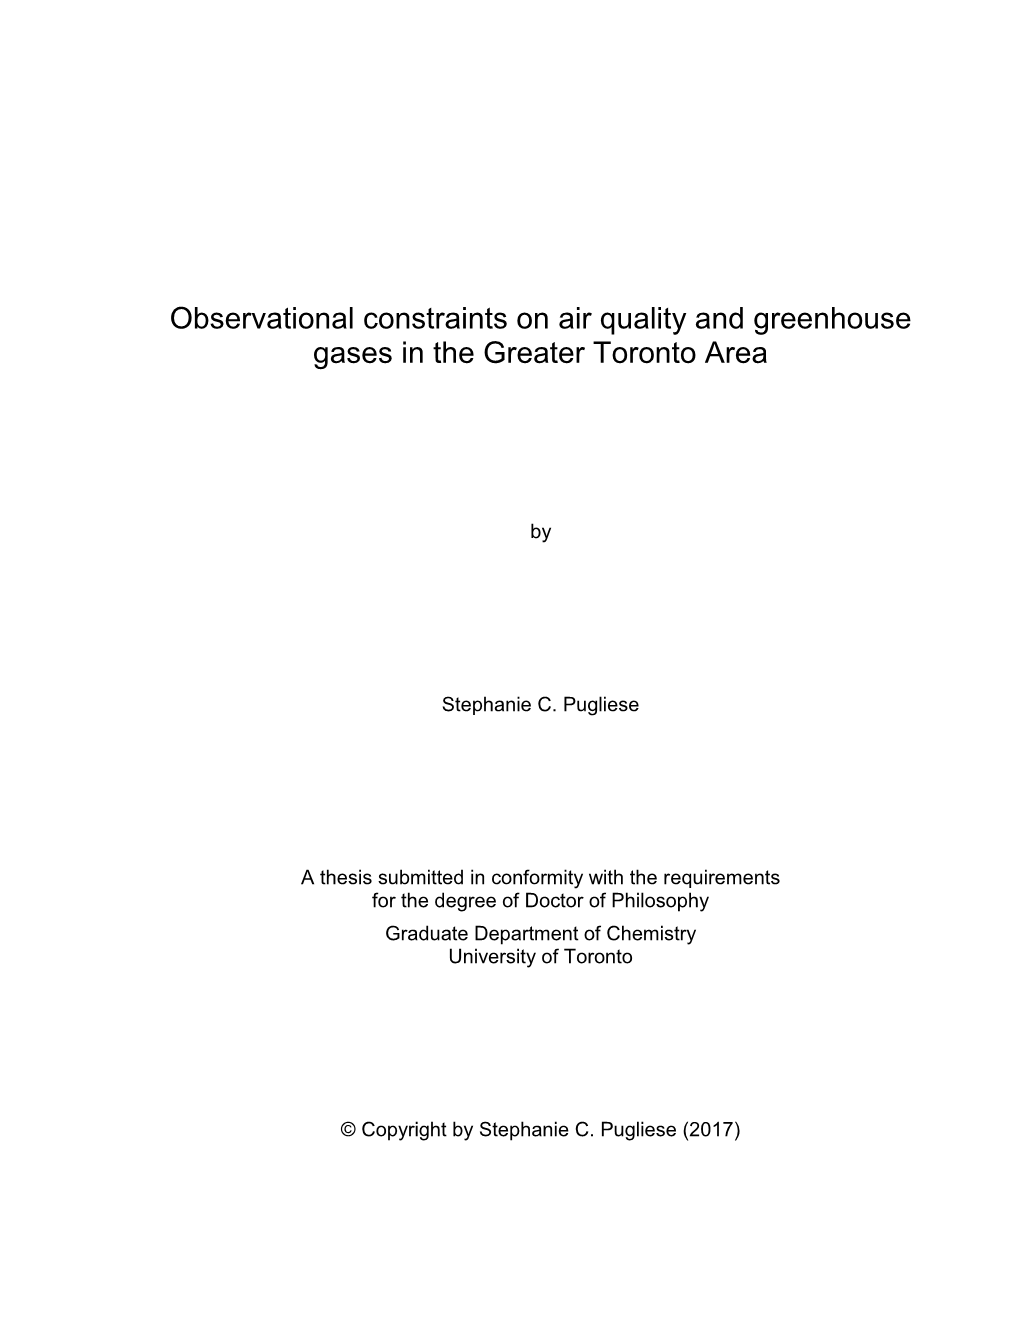 Observational Constraints on Air Quality and Greenhouse Gases in the Greater Toronto Area